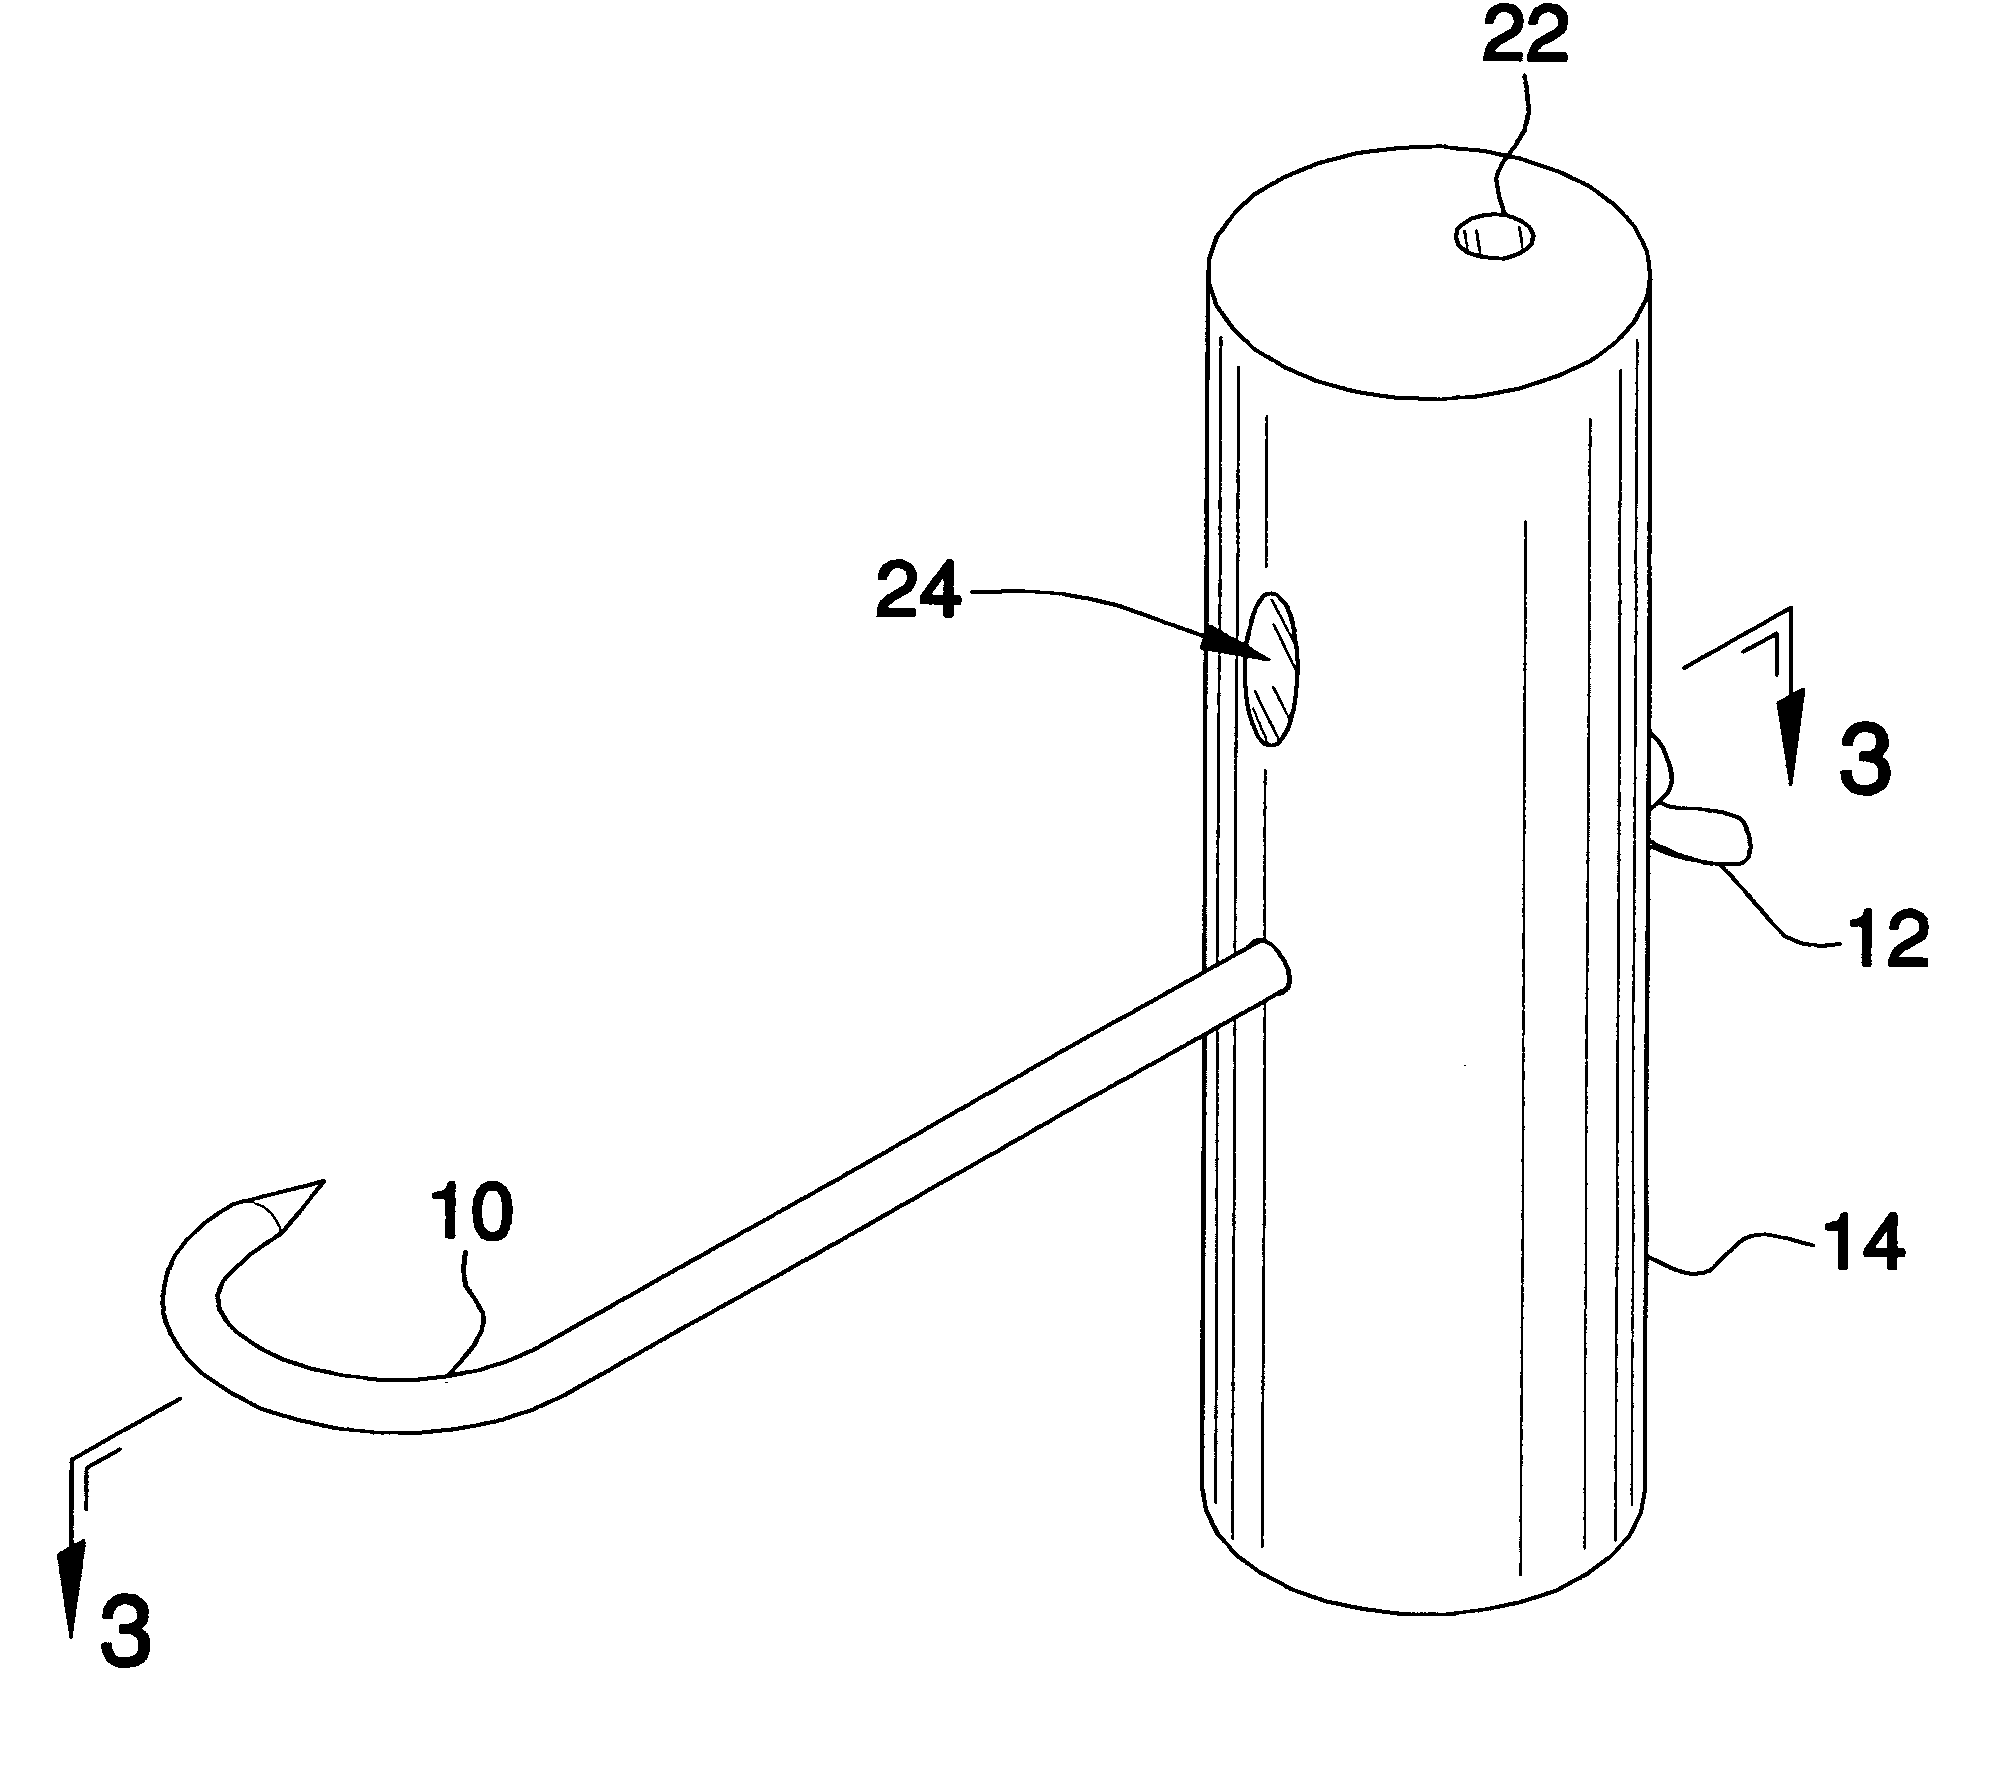 Animal dragger and method for using and storing the same